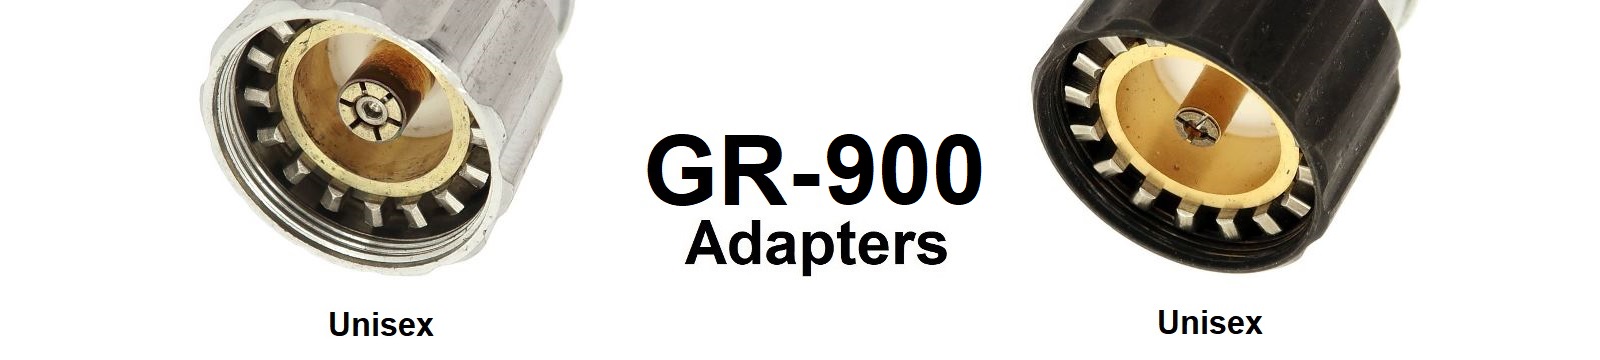 GR-900 Adapters Category Banner - Max-Gain Systems, Inc.